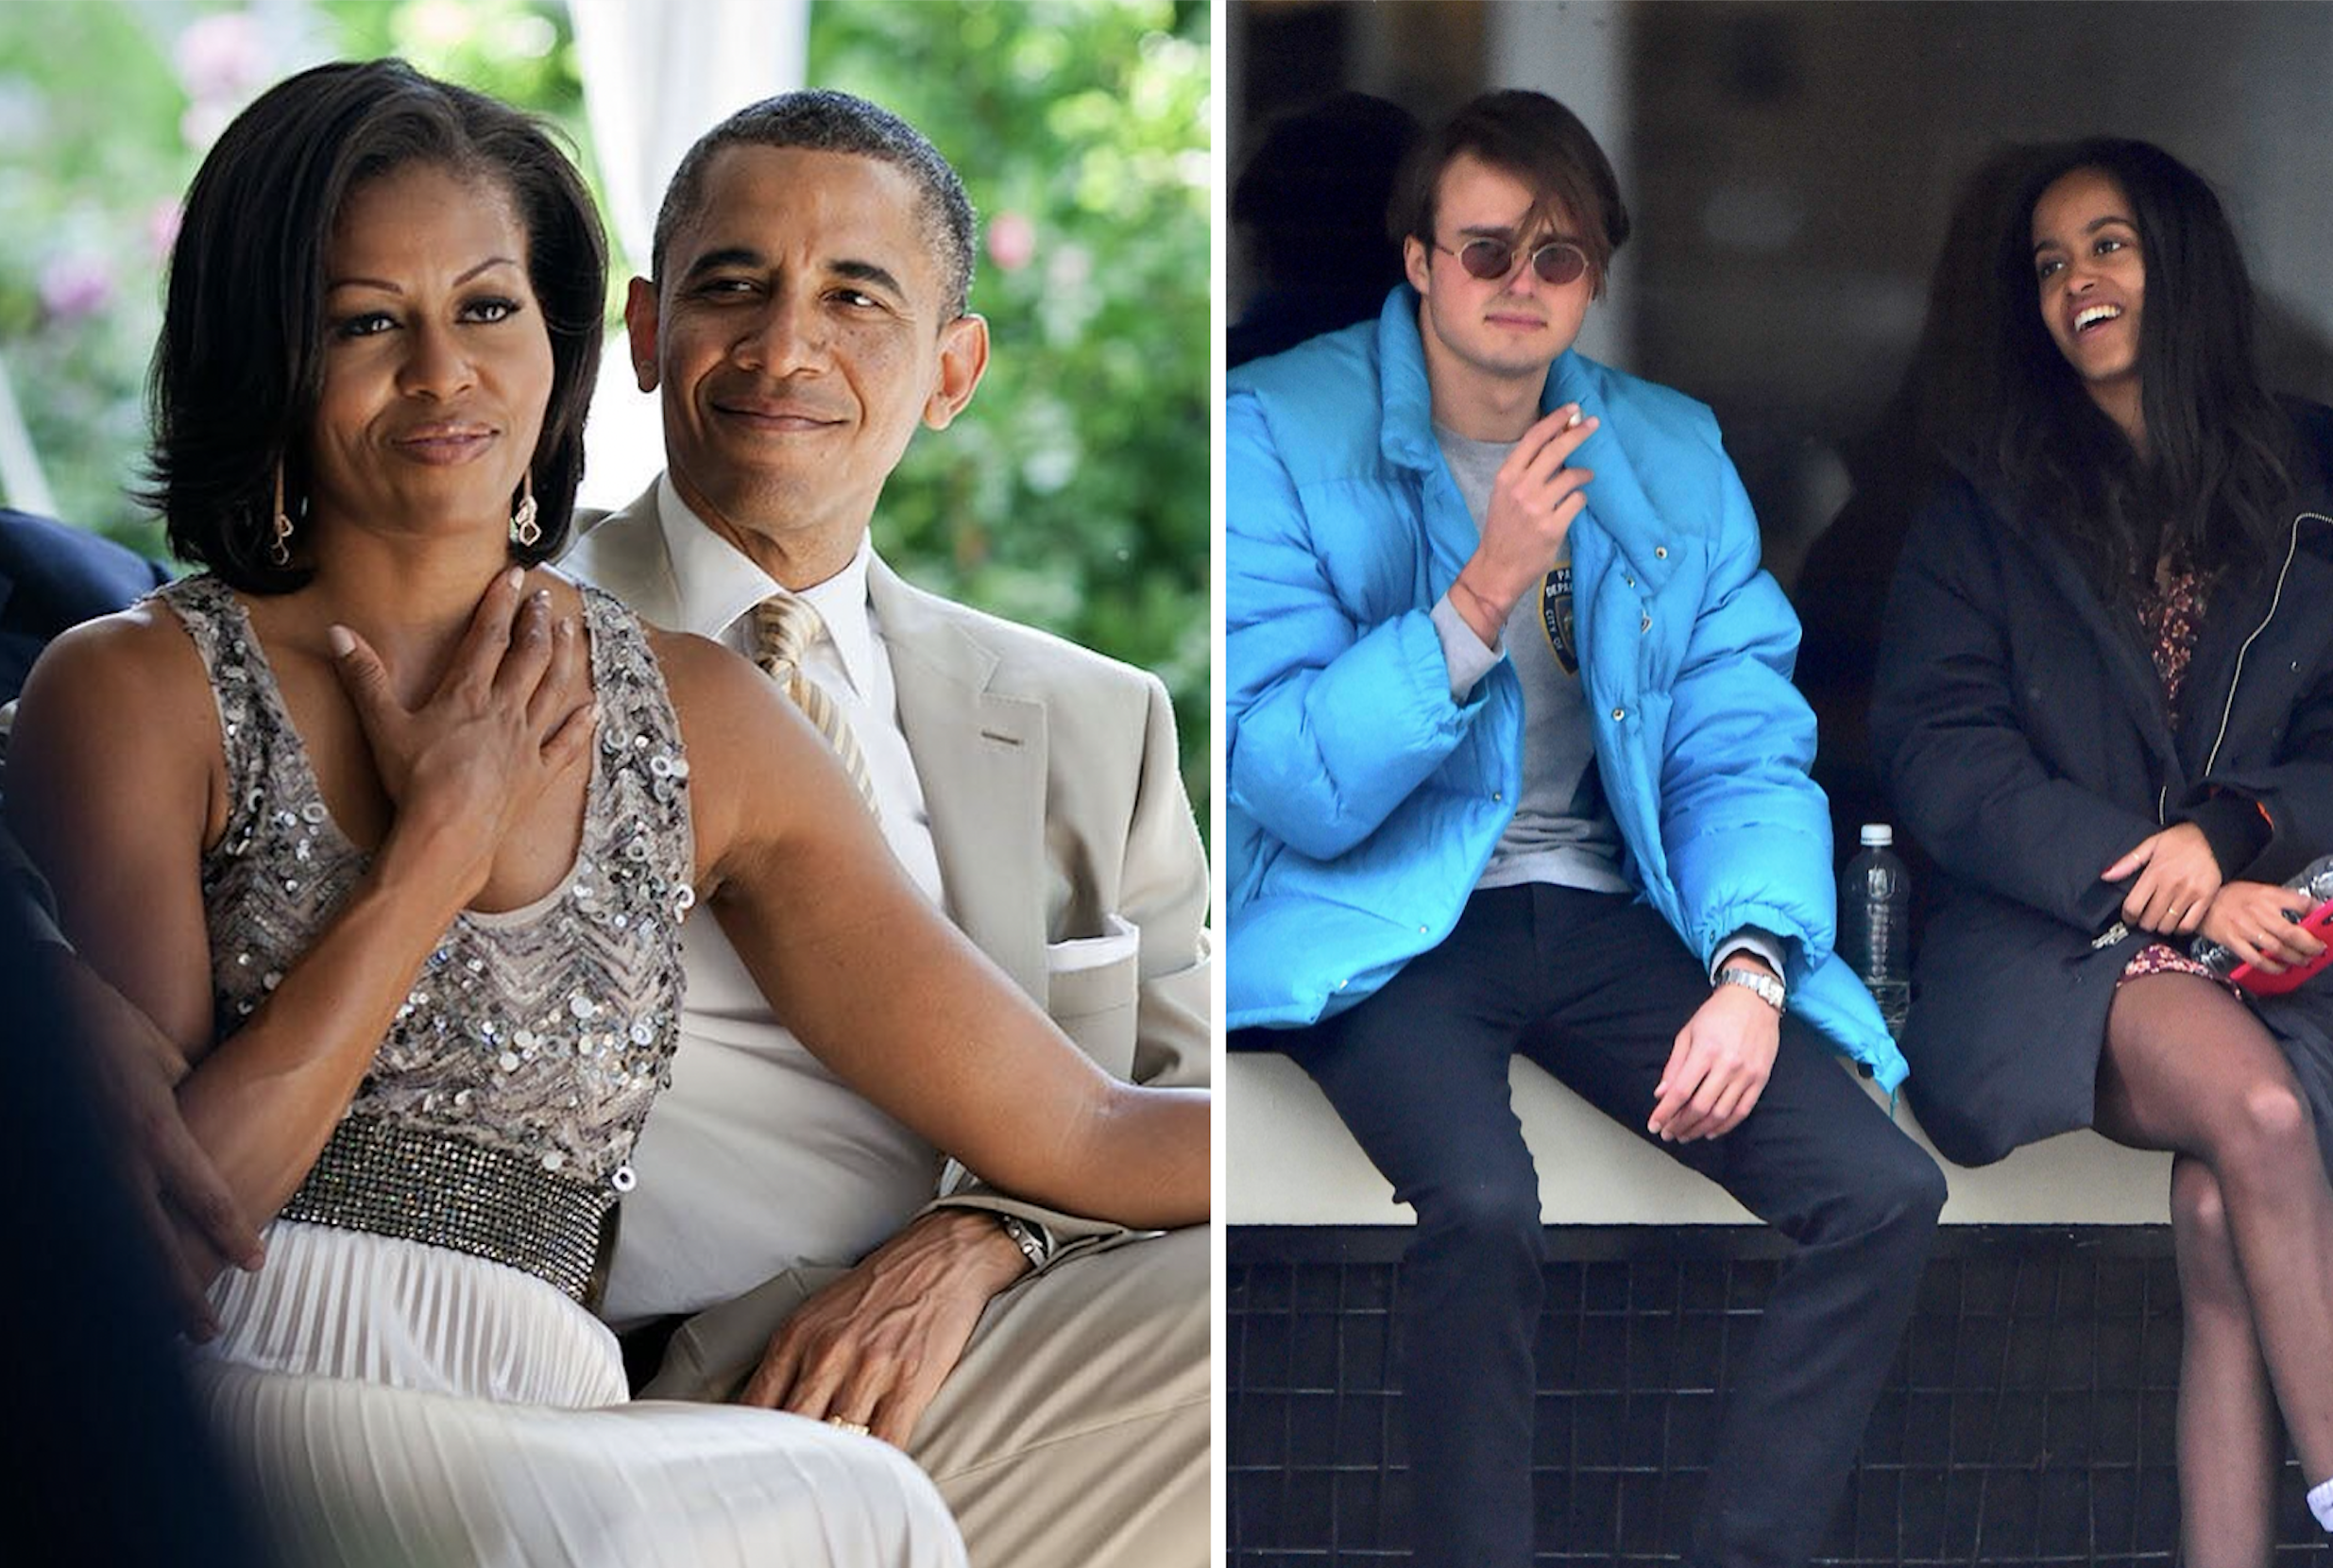 Michelle and Barack Obama; Rory Farquharson and Malia Obama. The Obamas have plenty of sage dating advice for their daughter, but does she follow it? Photos: @barackobama/Instagram; Alo Ceballos/Getty Images